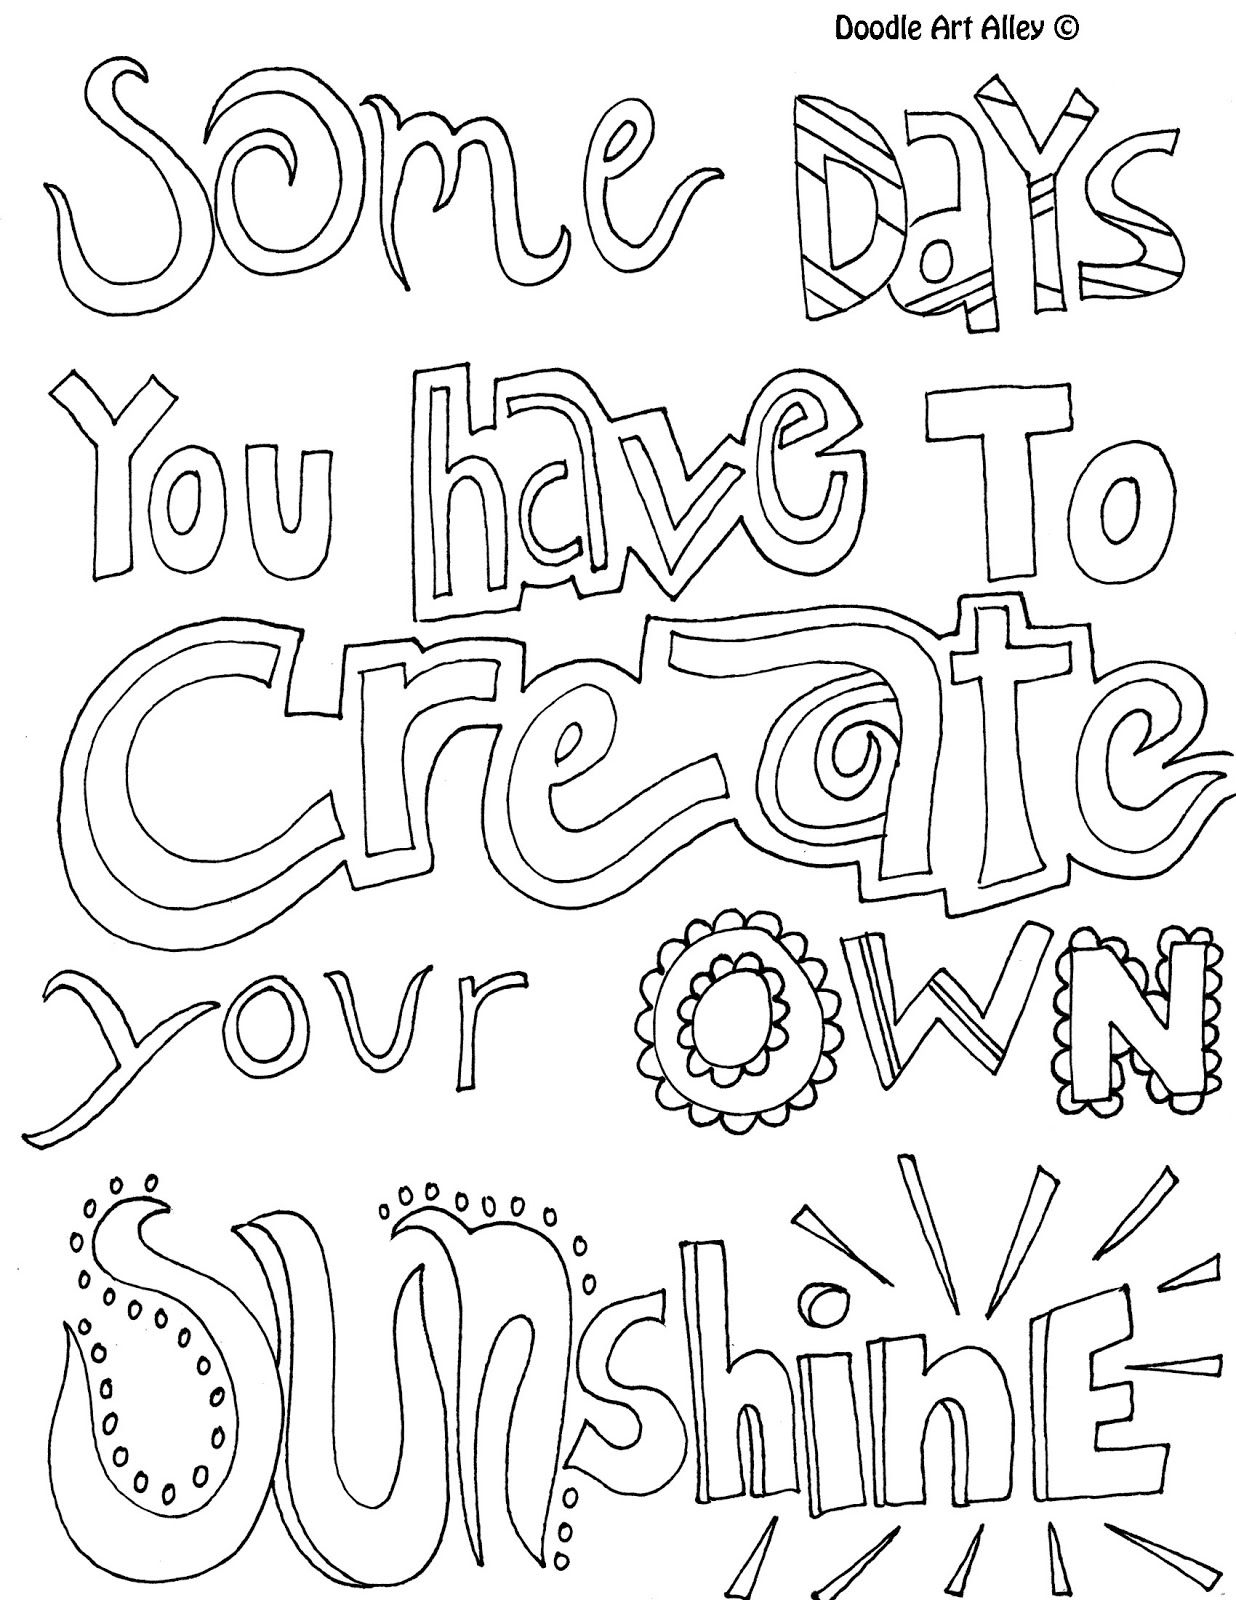 Quote Coloring Pages To Print at GetDrawings Free download